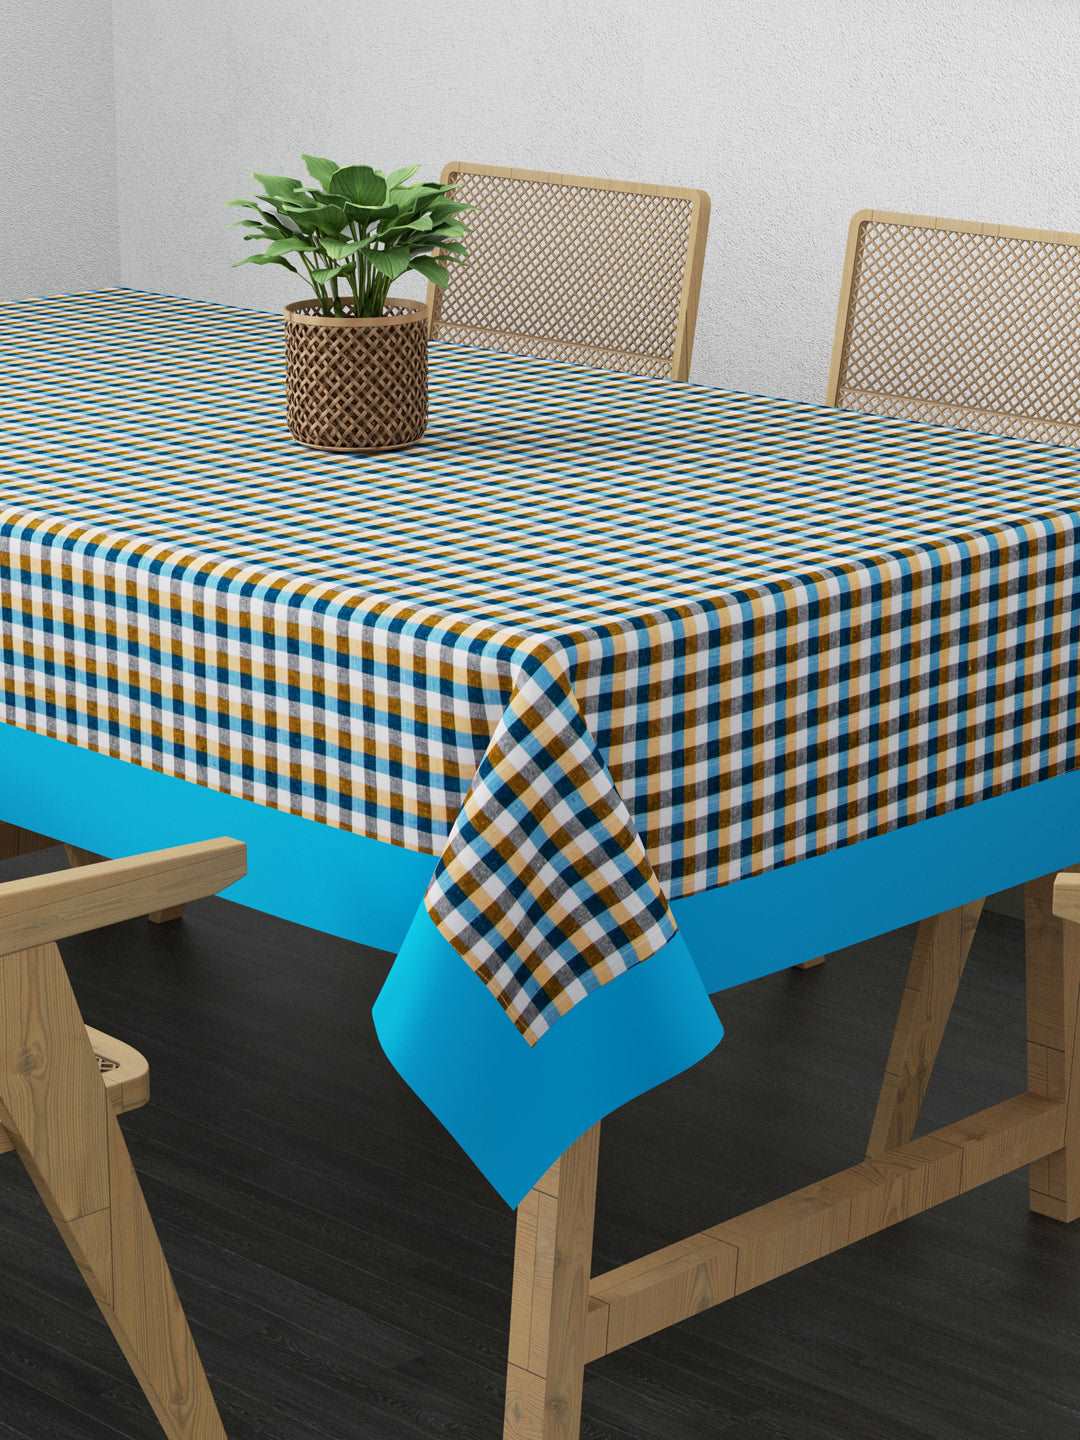 100% Cotton Table Cover 6 Seater, Blue, Yellow & White